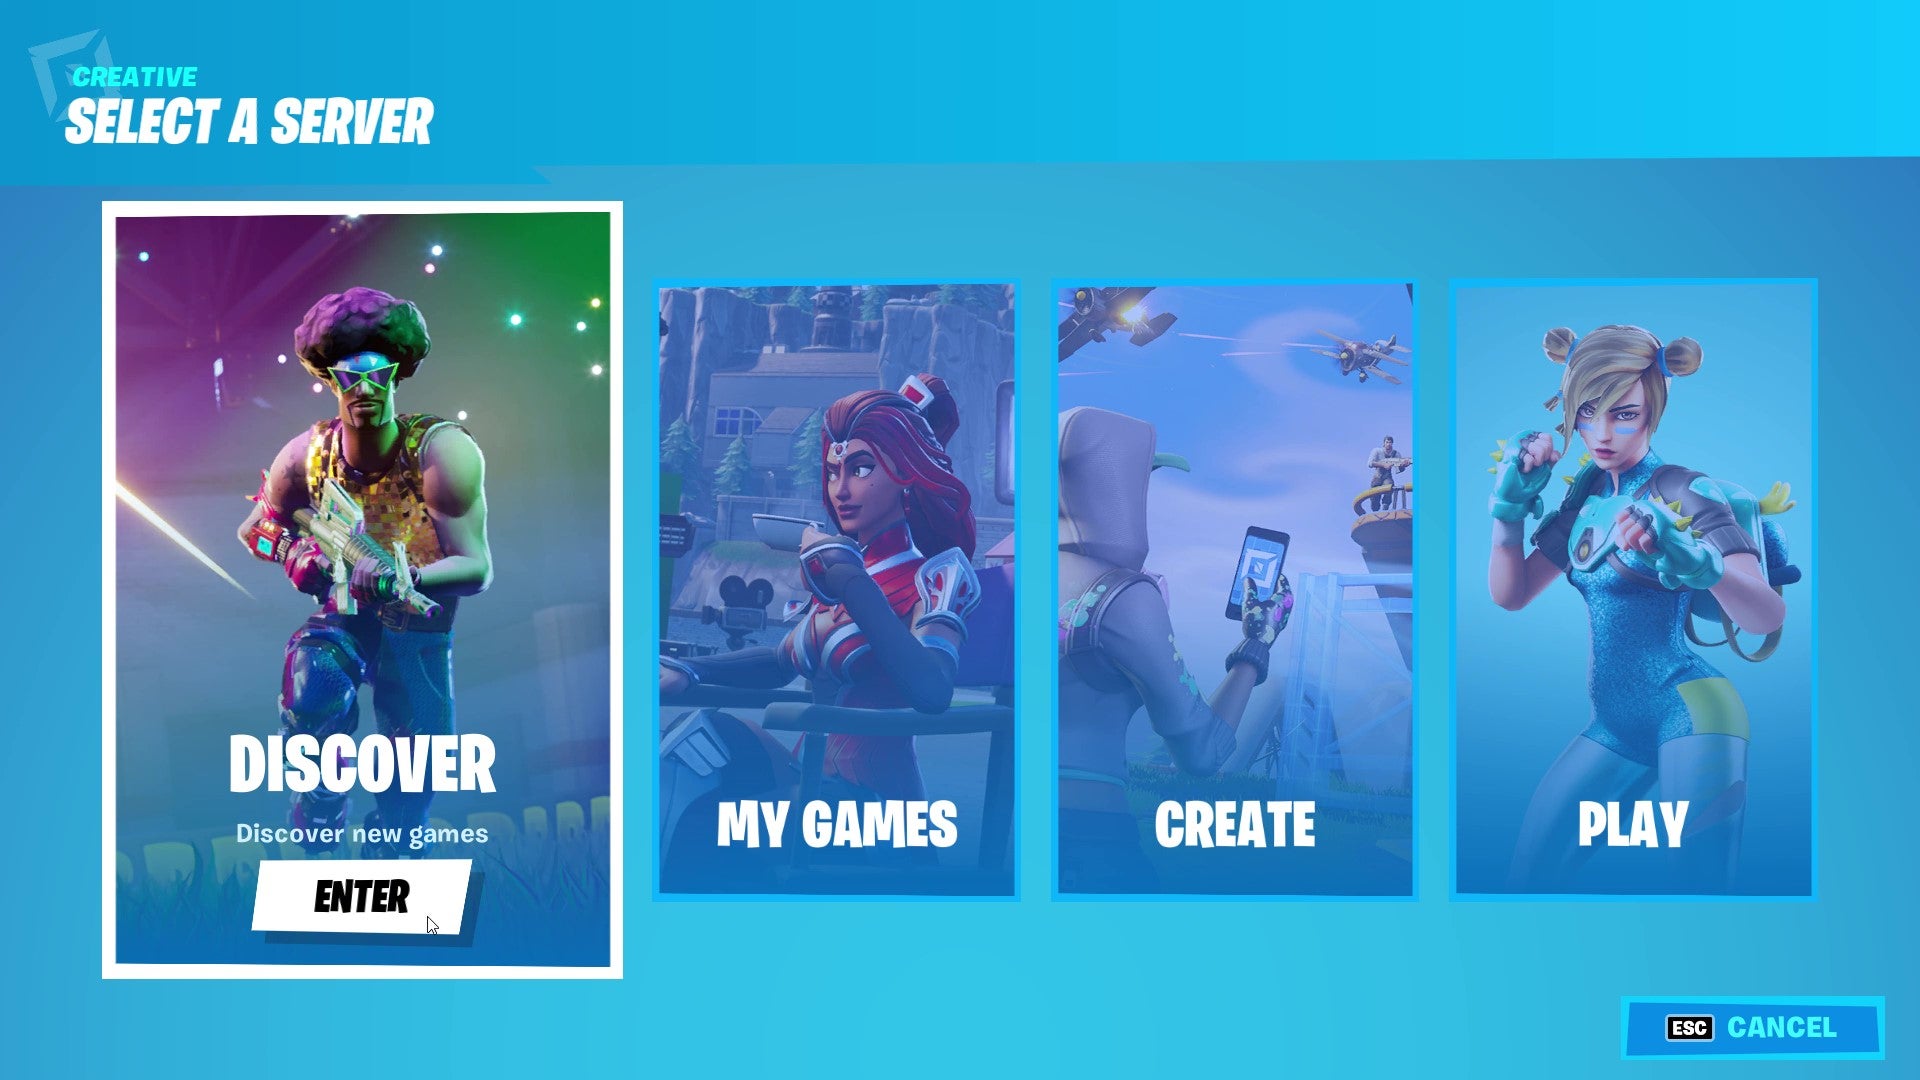 Fortnite Creative Mode's Server Select menu. Options are Discover, My Games, Create, and Play.